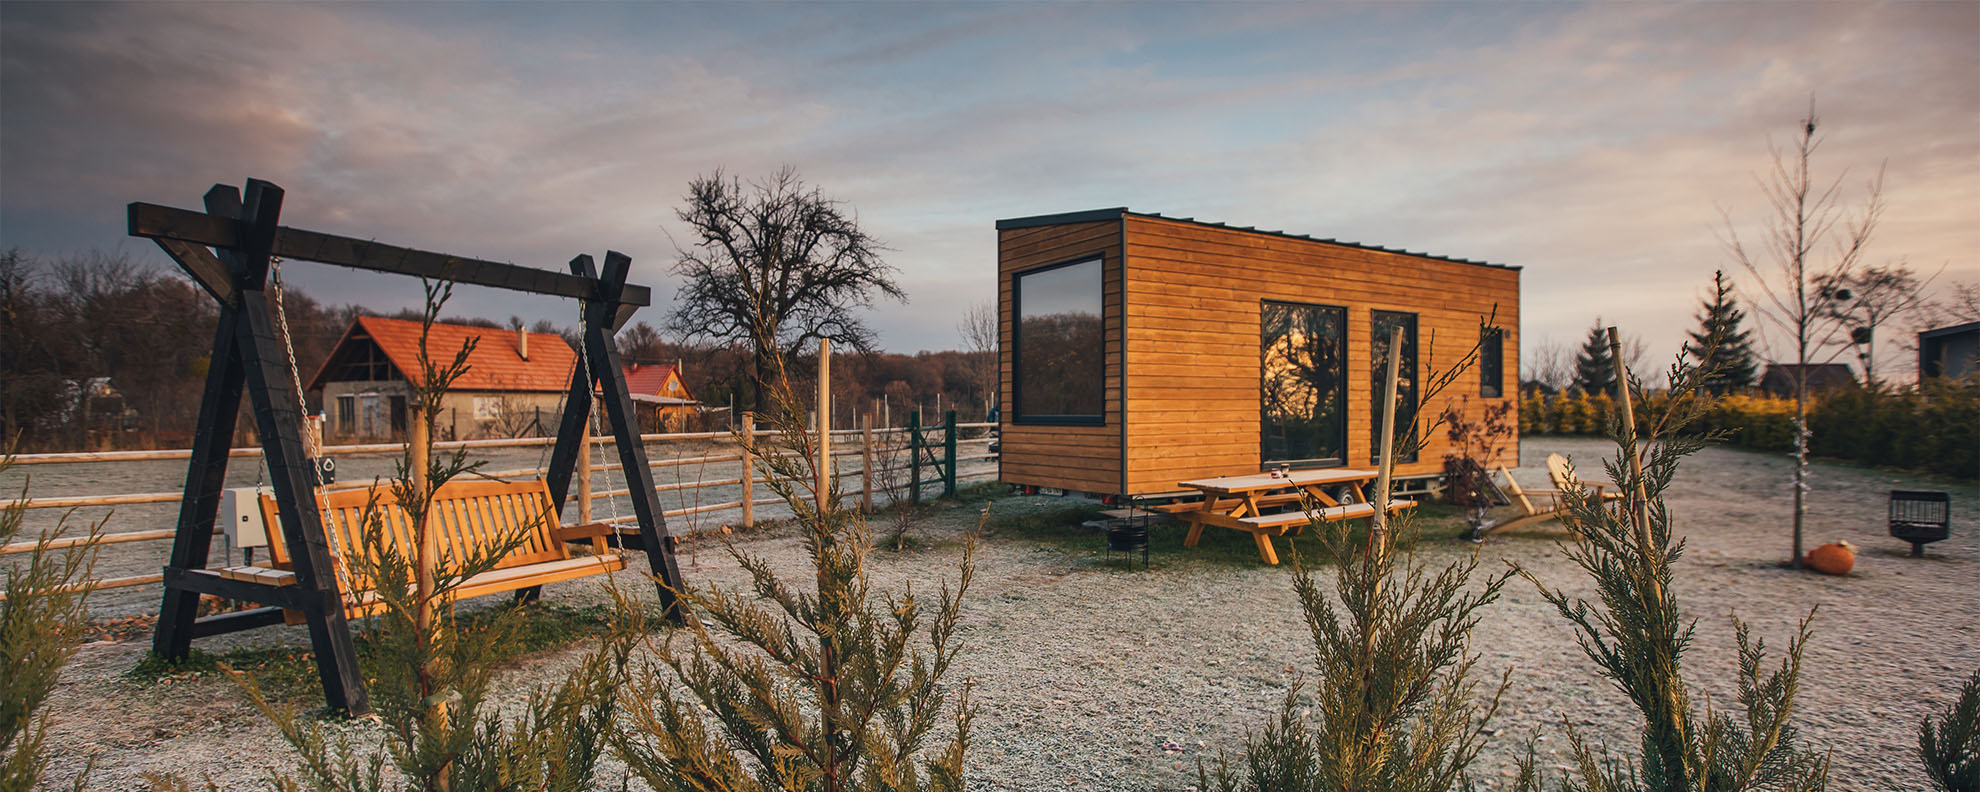 Modern tiny house in rural area 